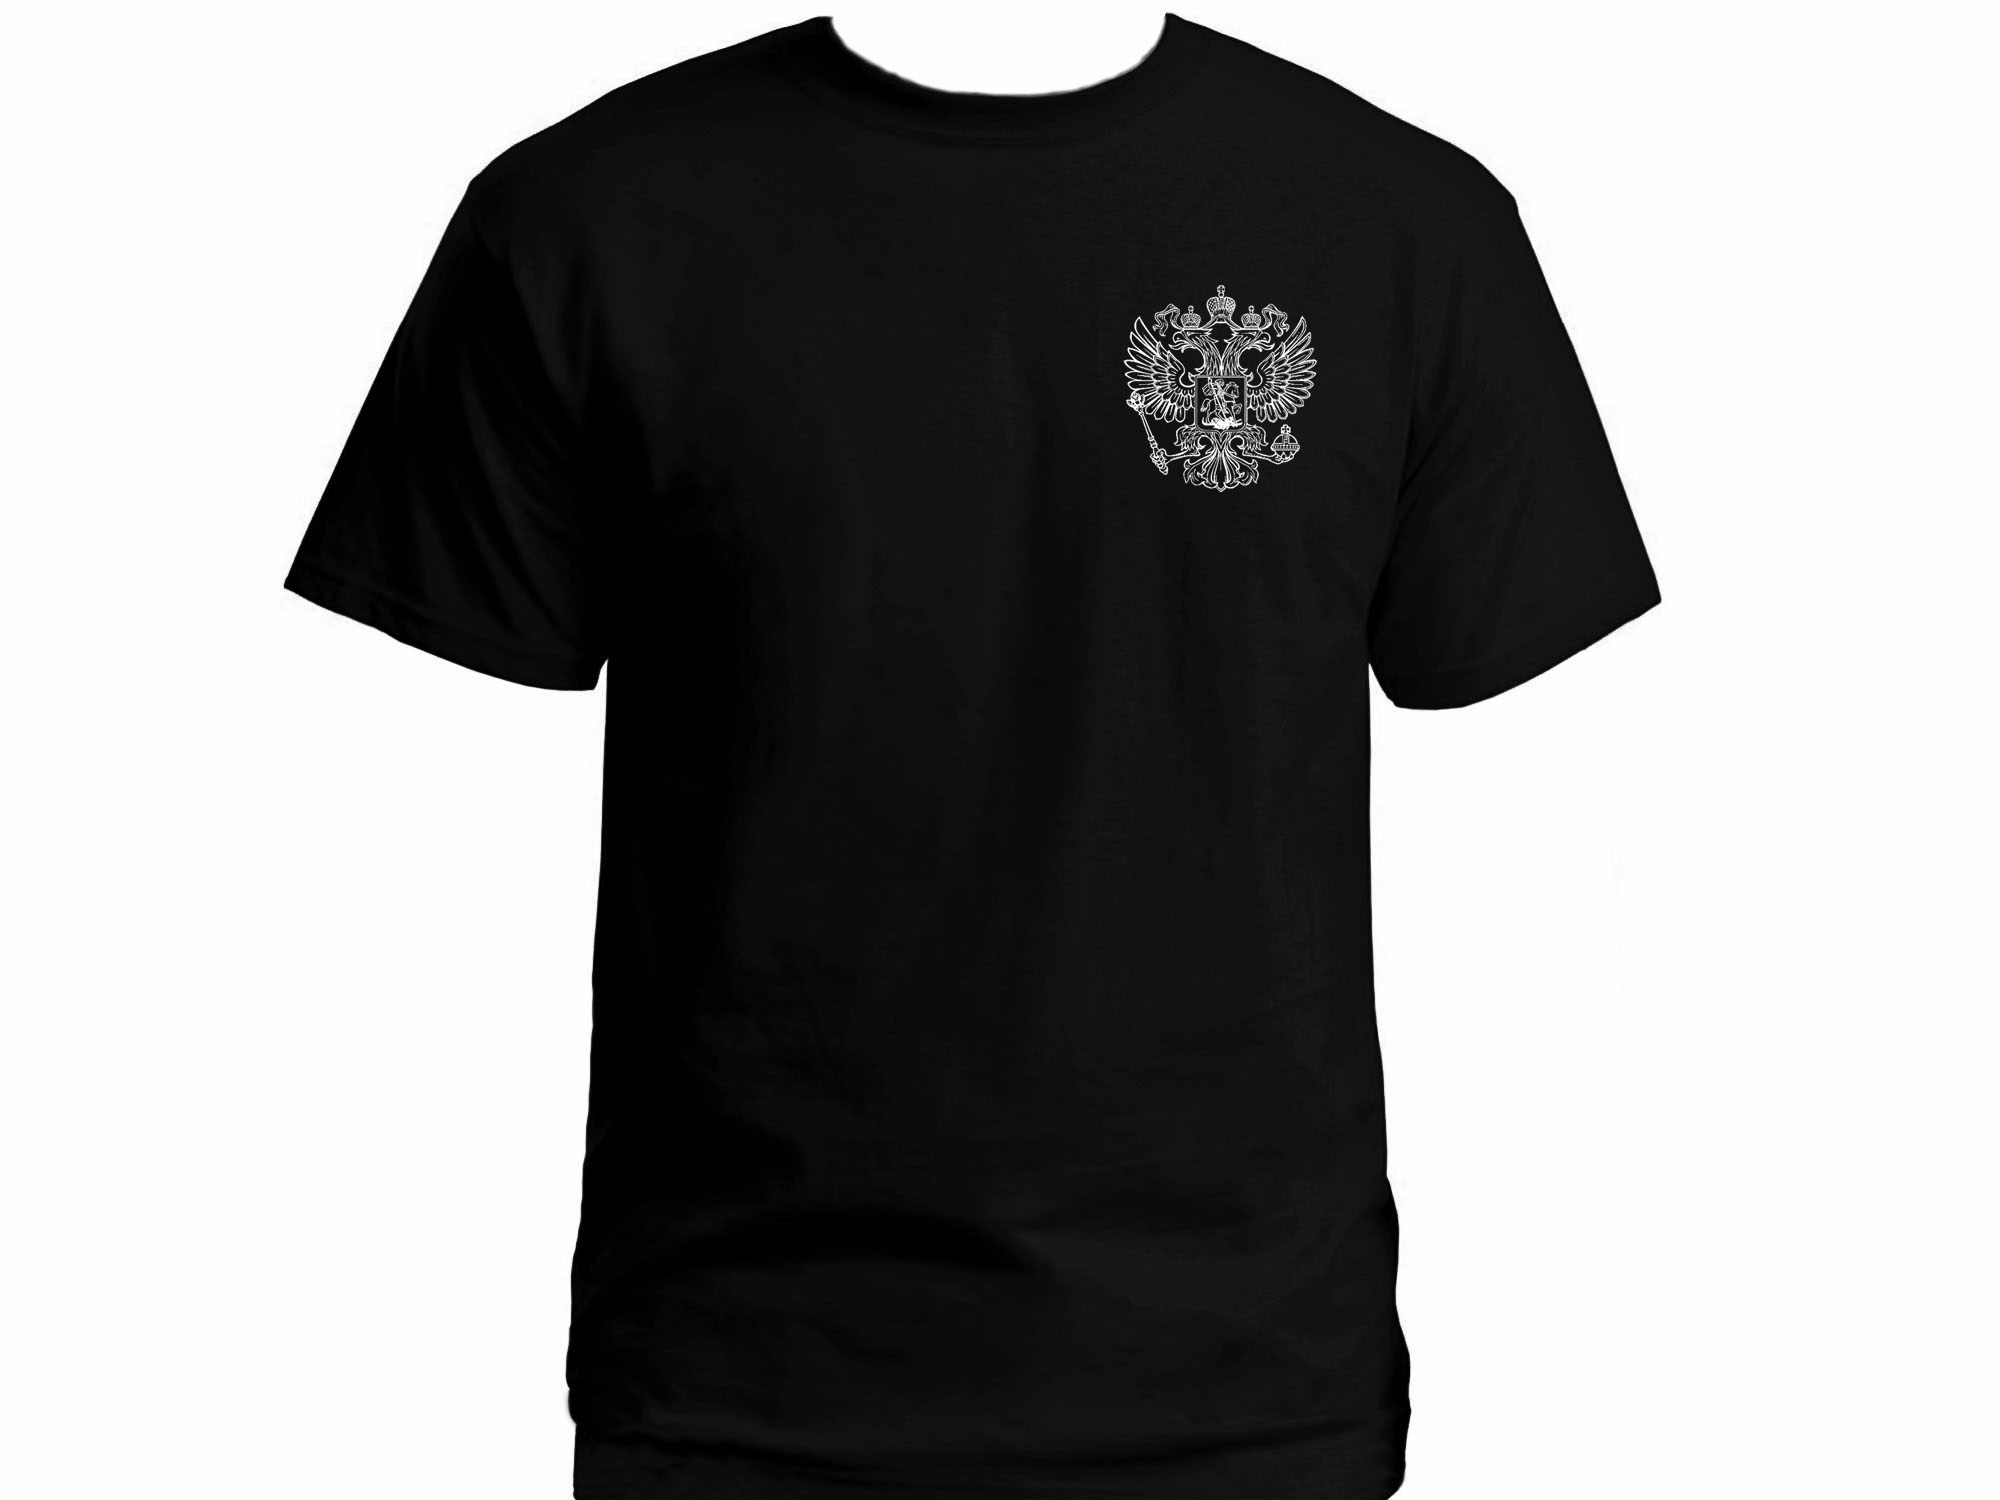 Russian coat of arms two headed eagle tee shirt